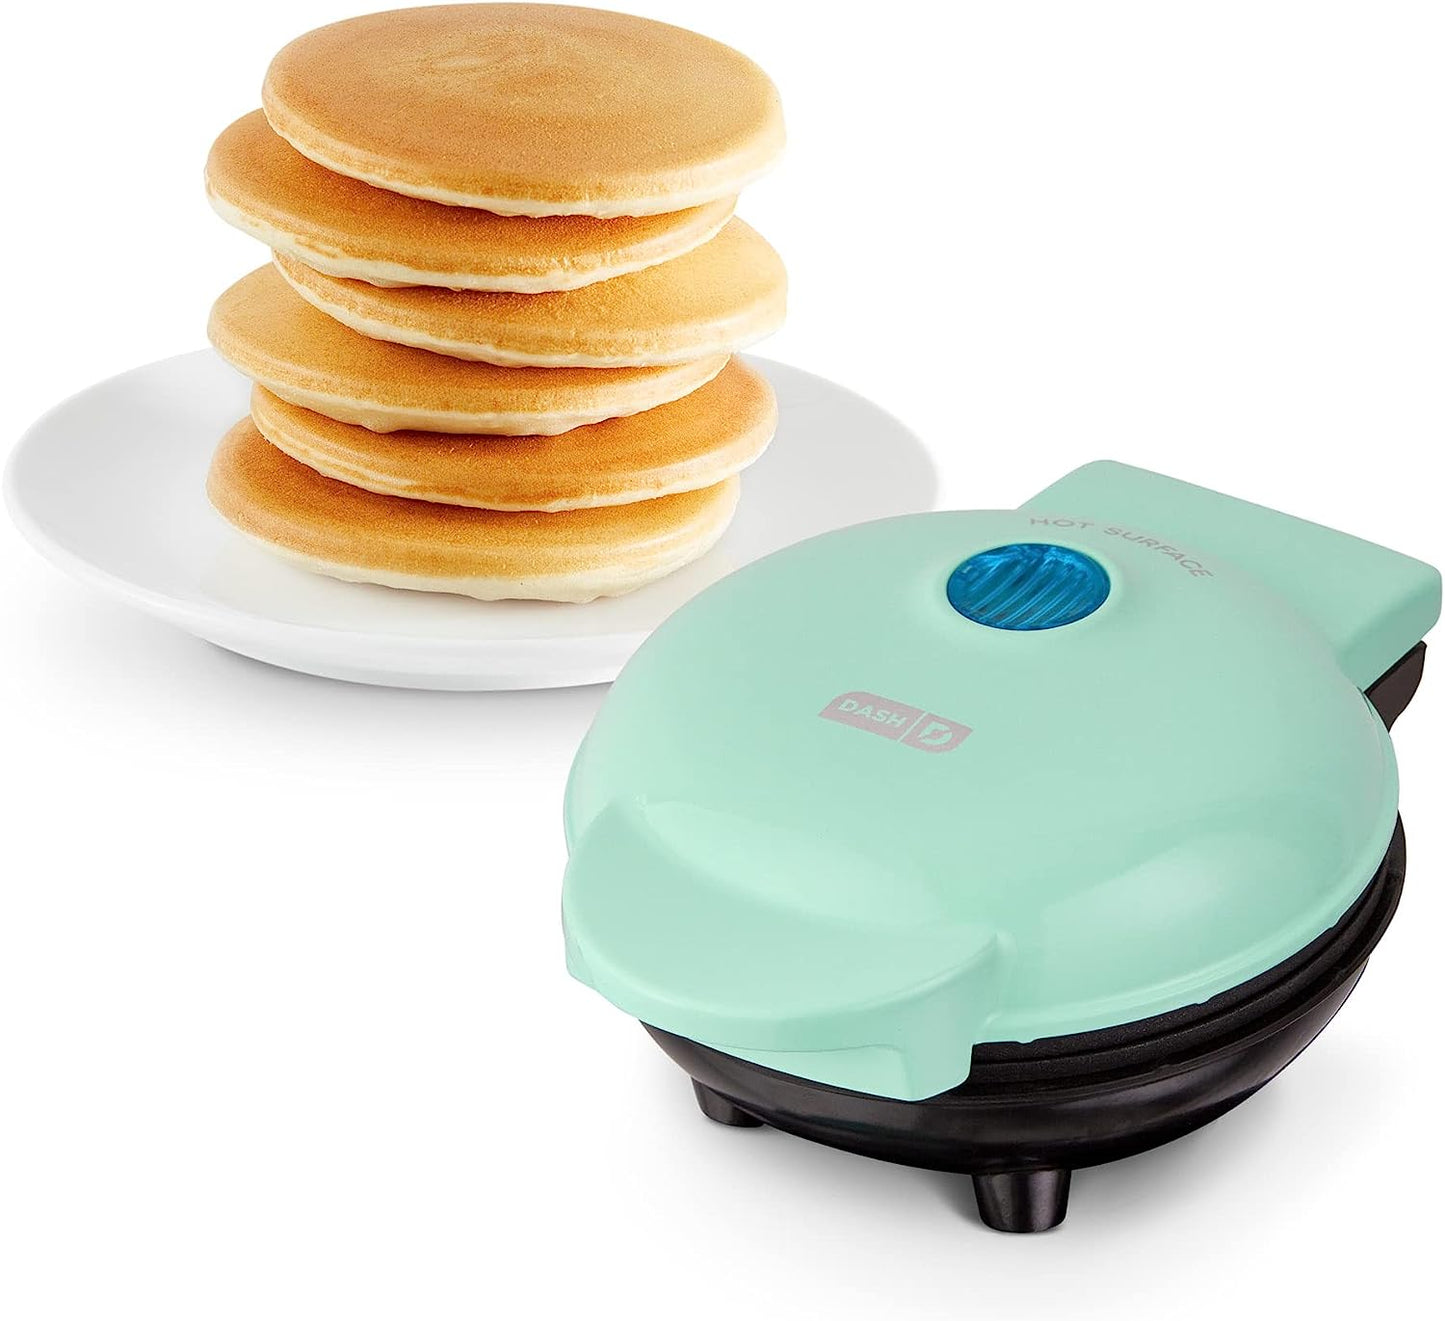 Mini Maker Electric Round Griddle for Individual Pancakes, Cookies, Eggs